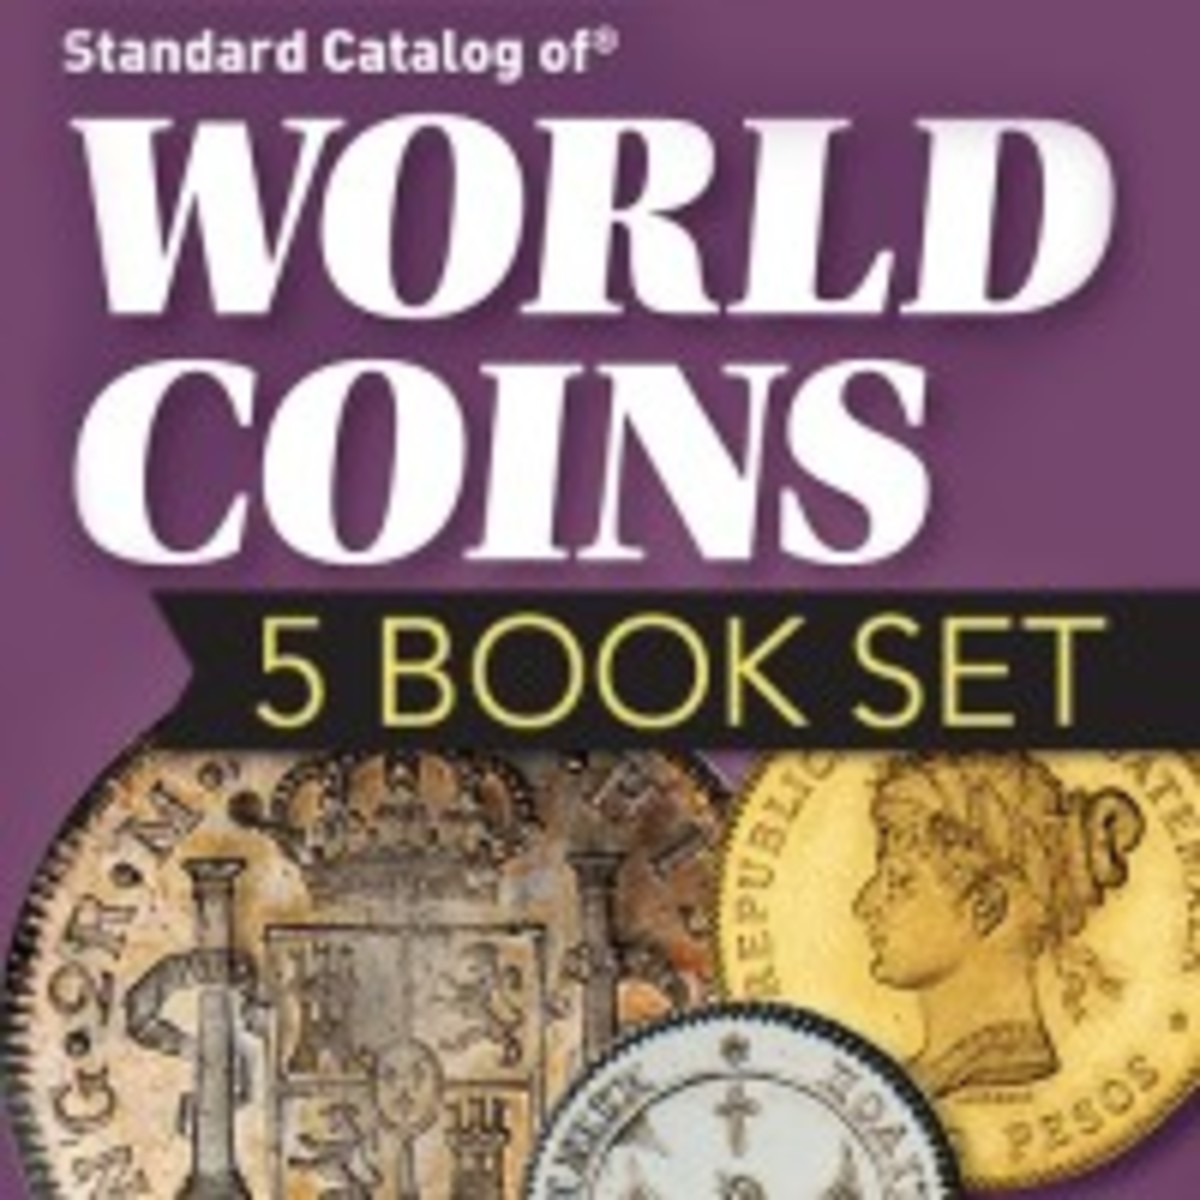 The famous five book Standard Catalog of World Coins collection is back!